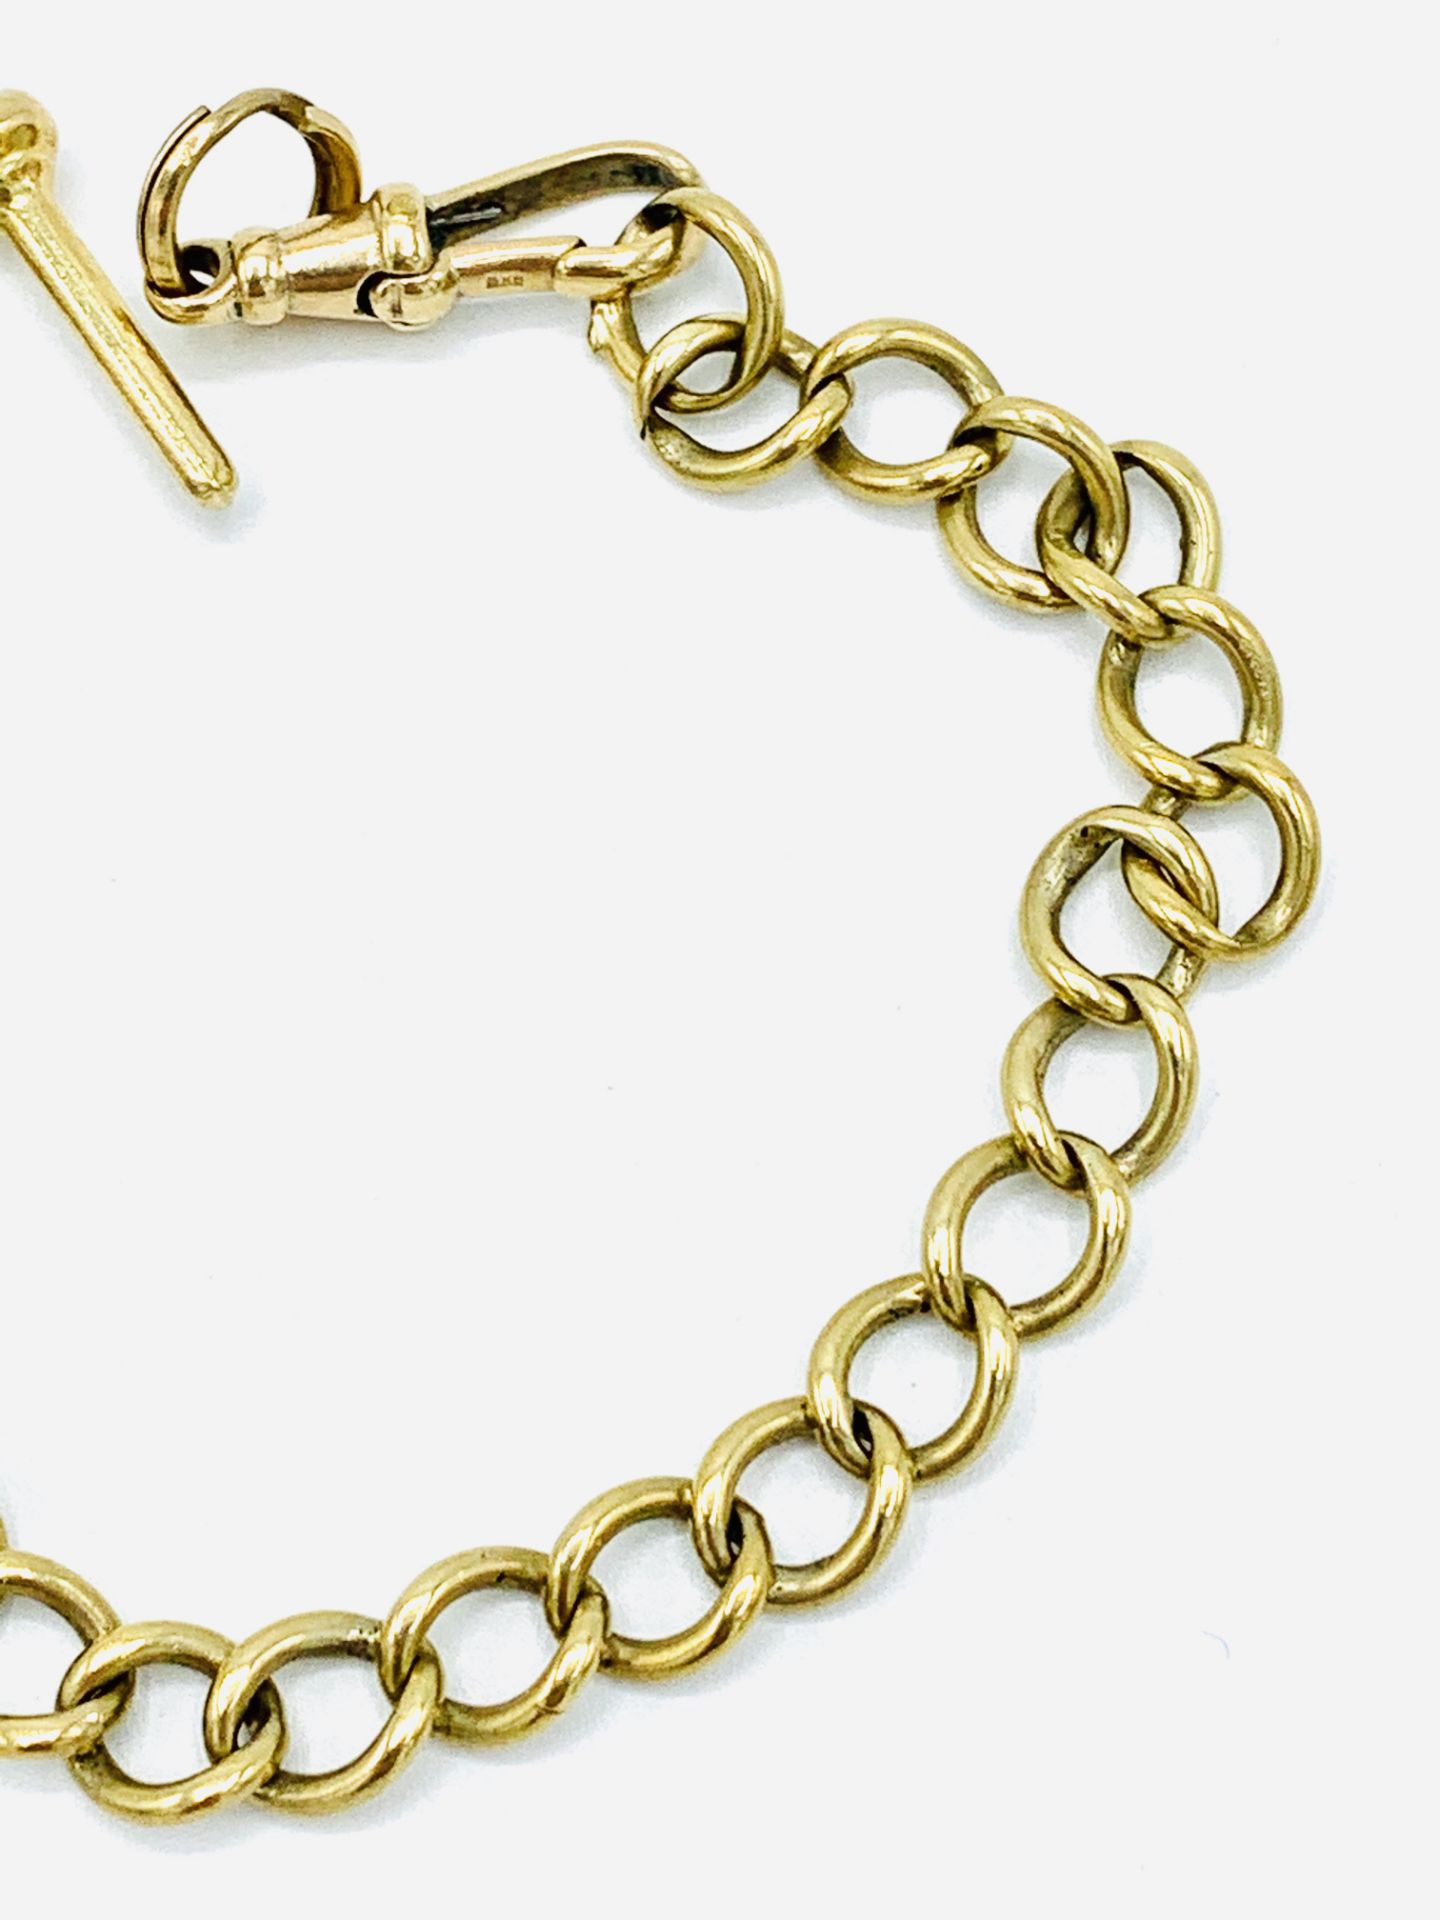 9ct gold fob chain. - Image 5 of 5